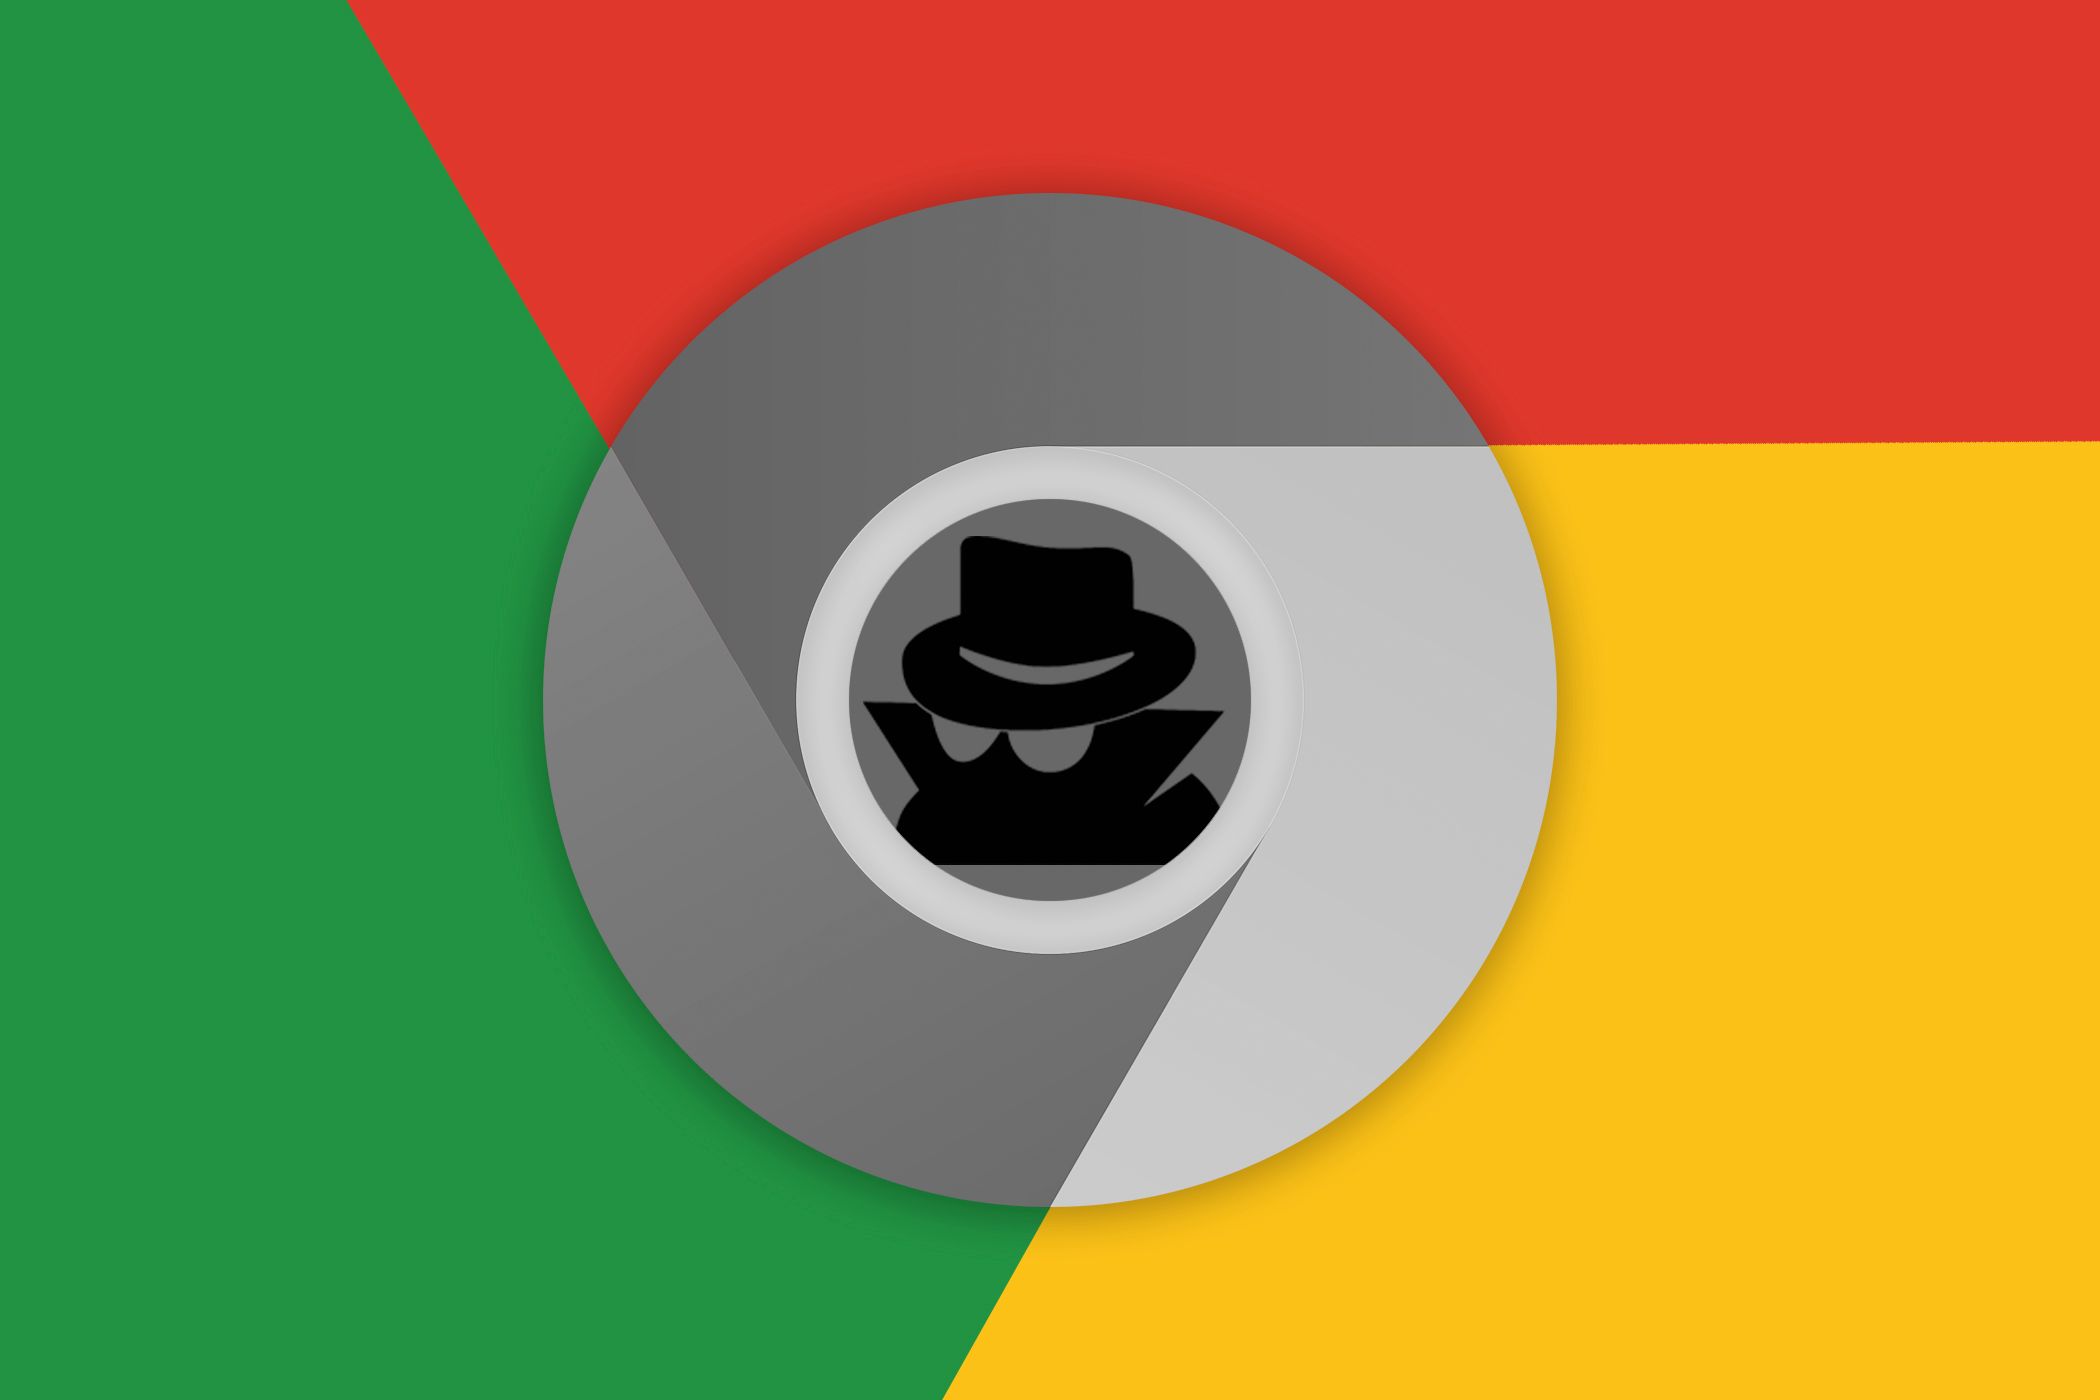 The Google Chome logo with the Incognito icon.